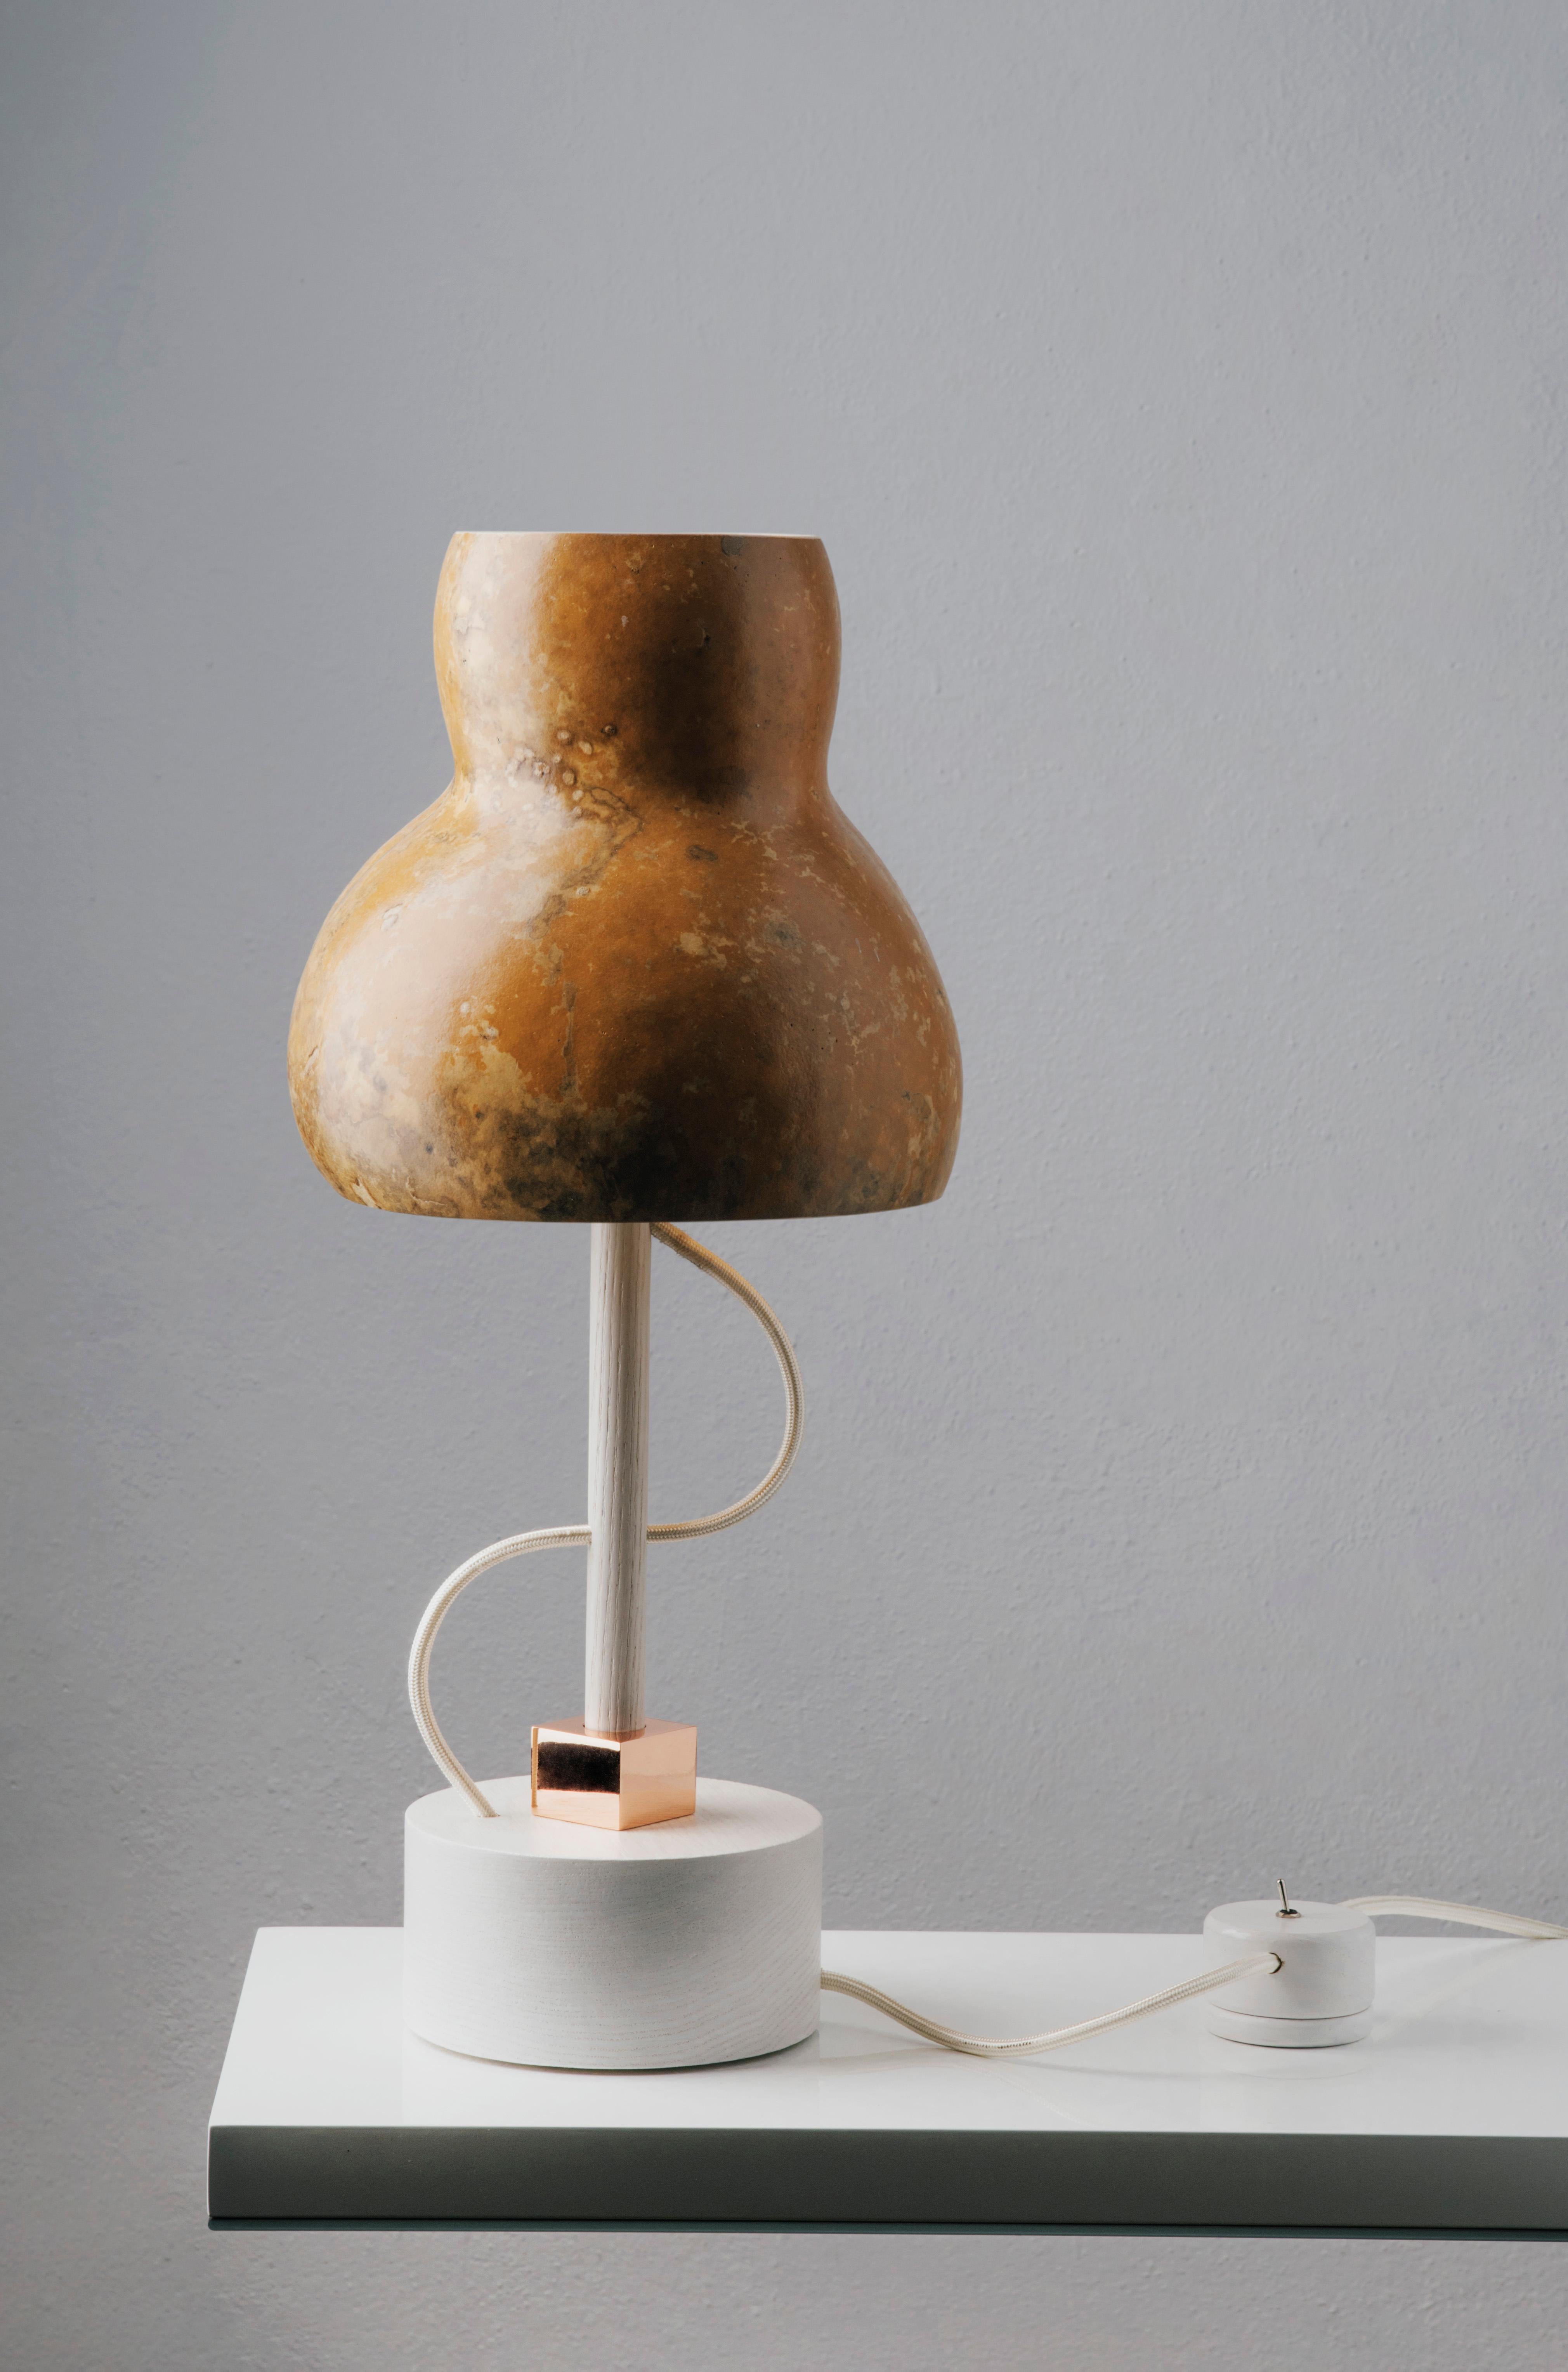 The desk lamp takes shapes from the animal and plant world. The lampshade in Lagenaria dried pumpkin, with its unique veining, together with the rounded ash wood base, brings to mind a typical inhabitant of the undergrowth.
The coloured fabric